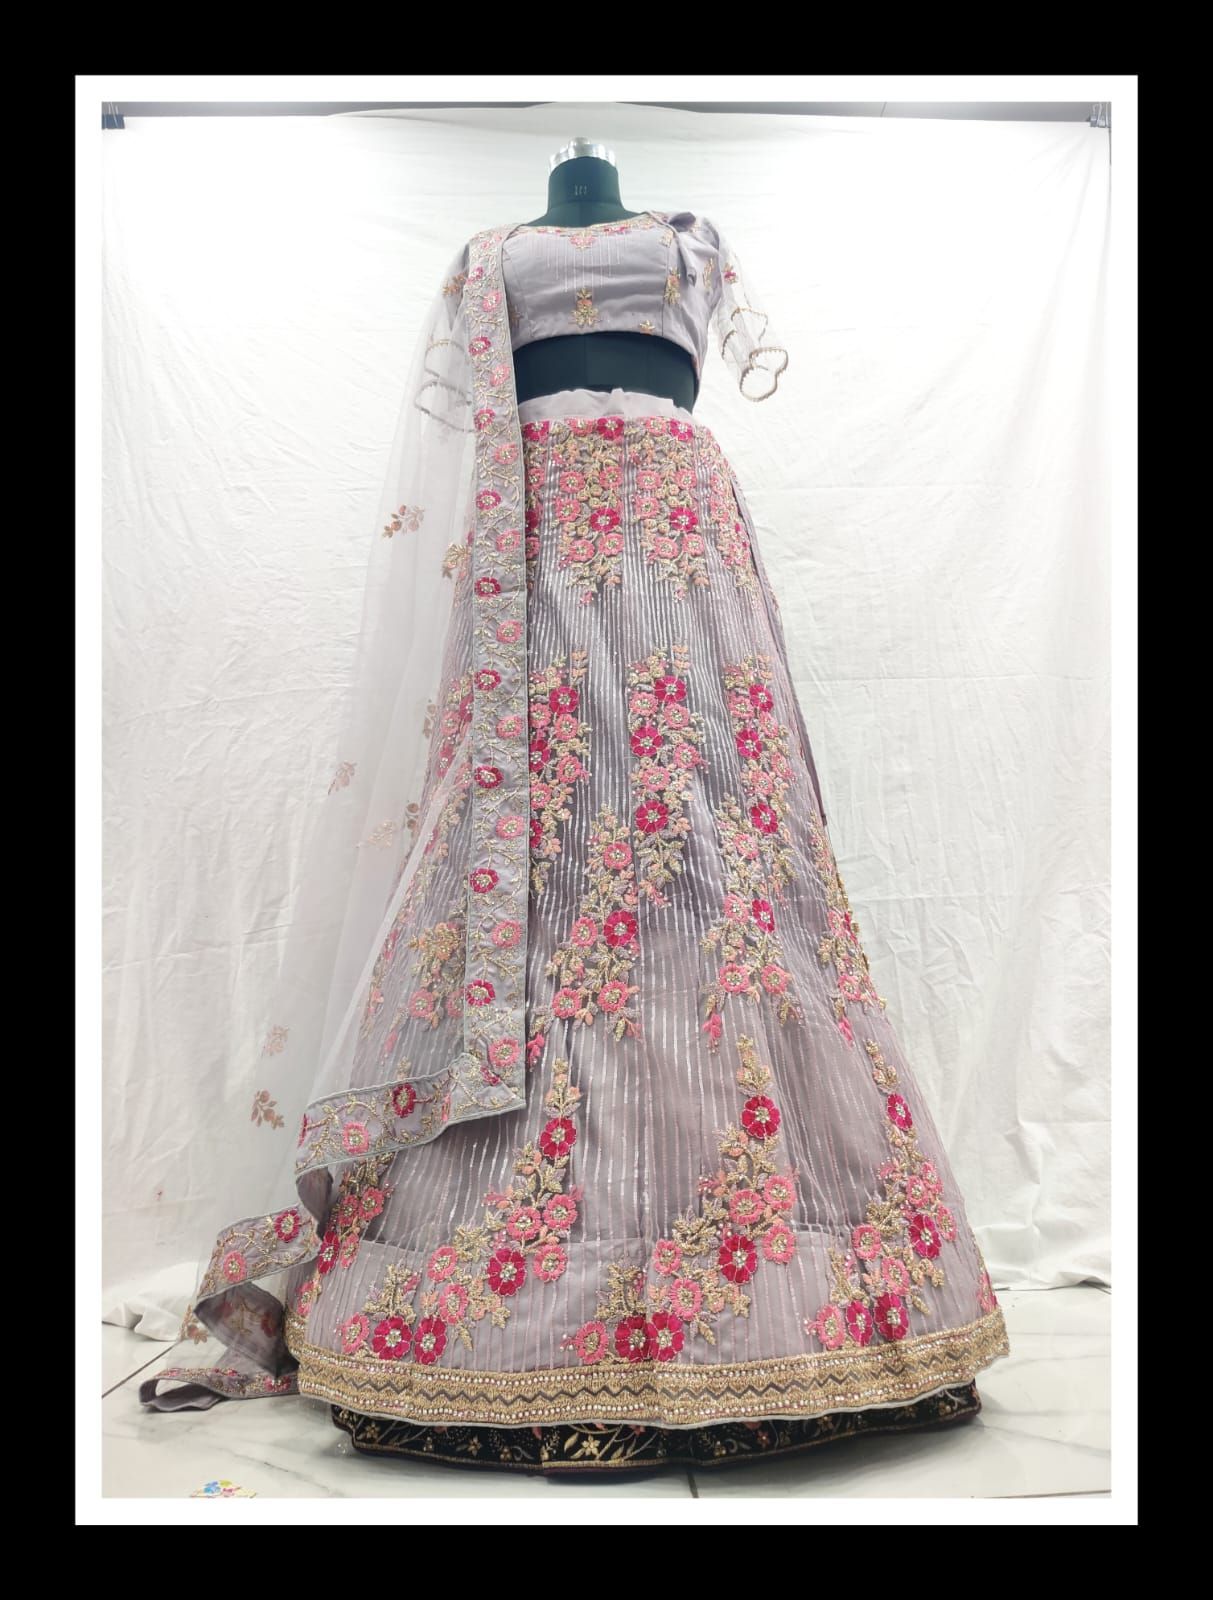 Sequence flower embroidery zari - $125